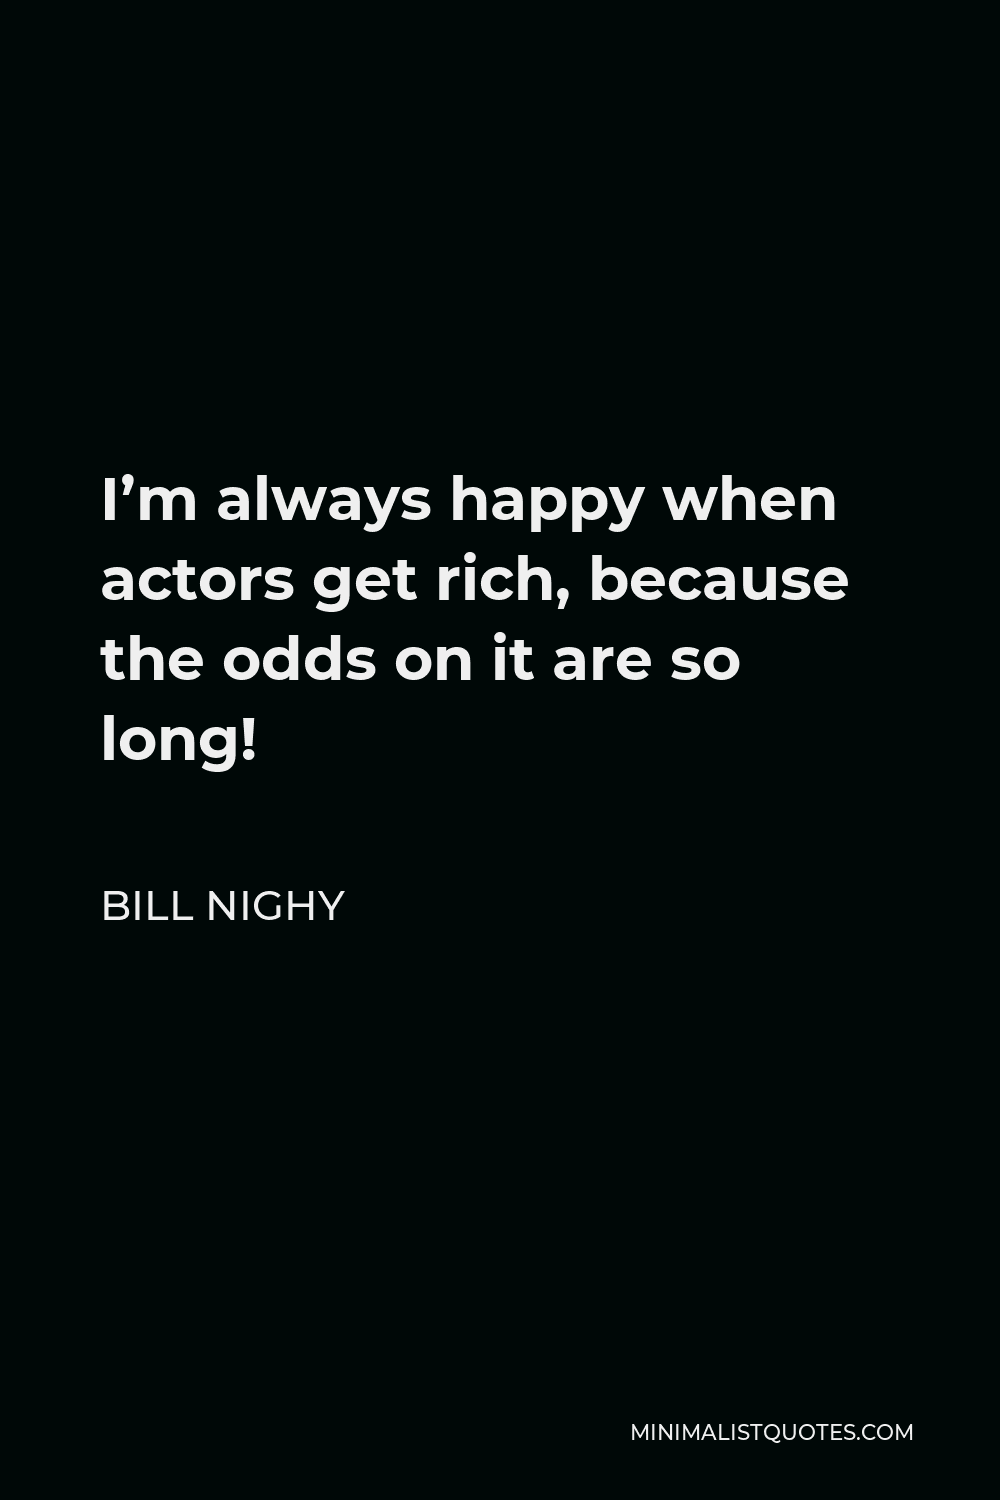 Bill Nighy Quote - I’m always happy when actors get rich, because the odds on it are so long!